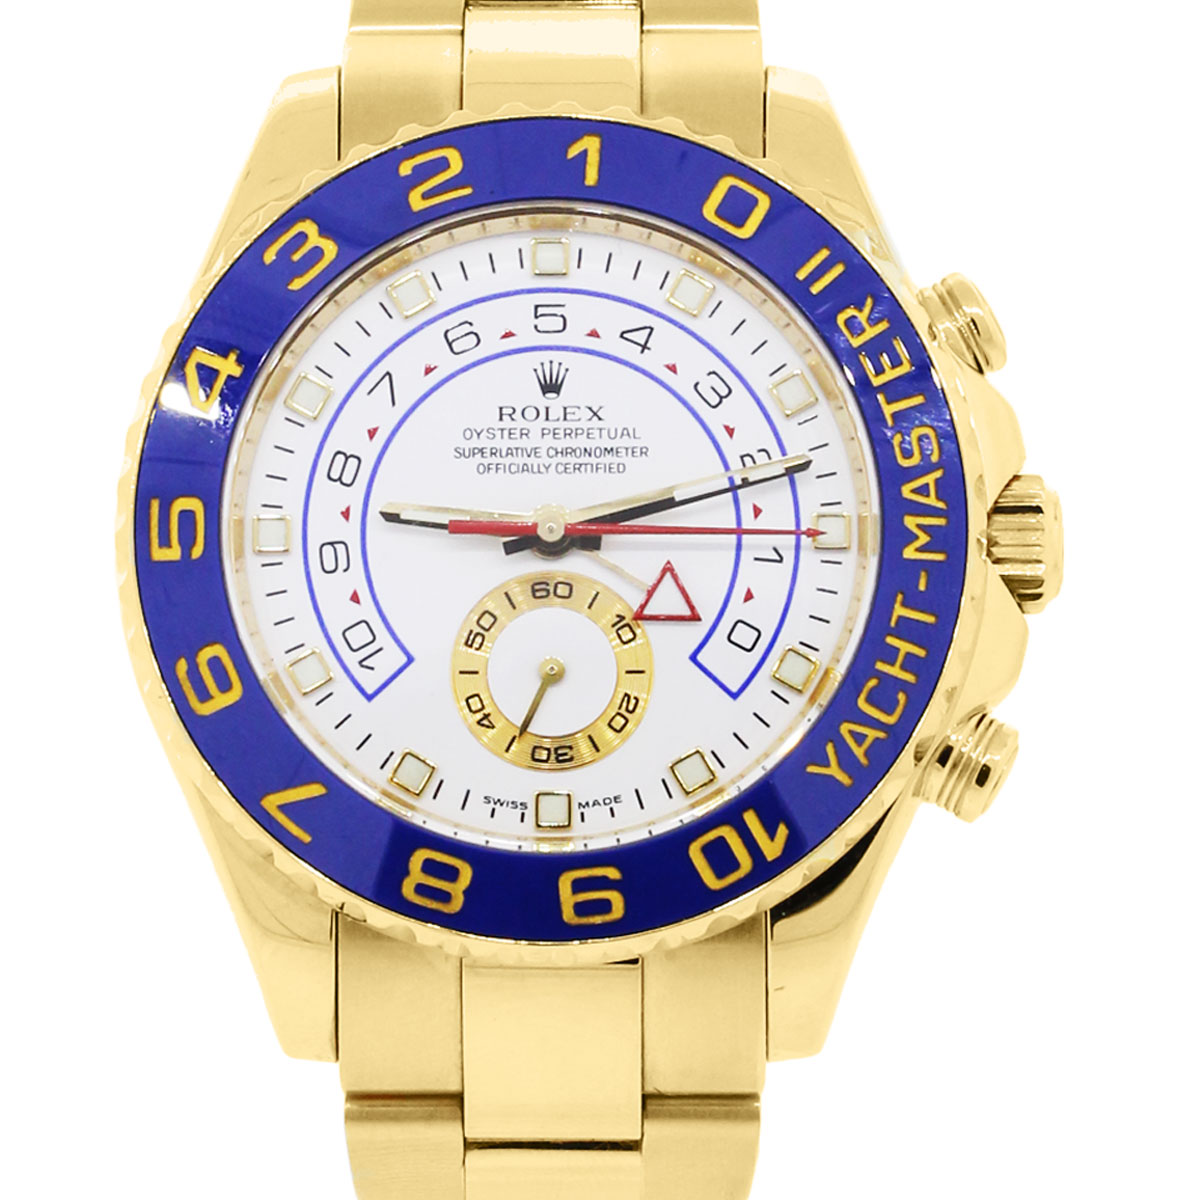 You are viewing this Rolex 116688 Yachtmaster II 18k Yellow Gold Watch!